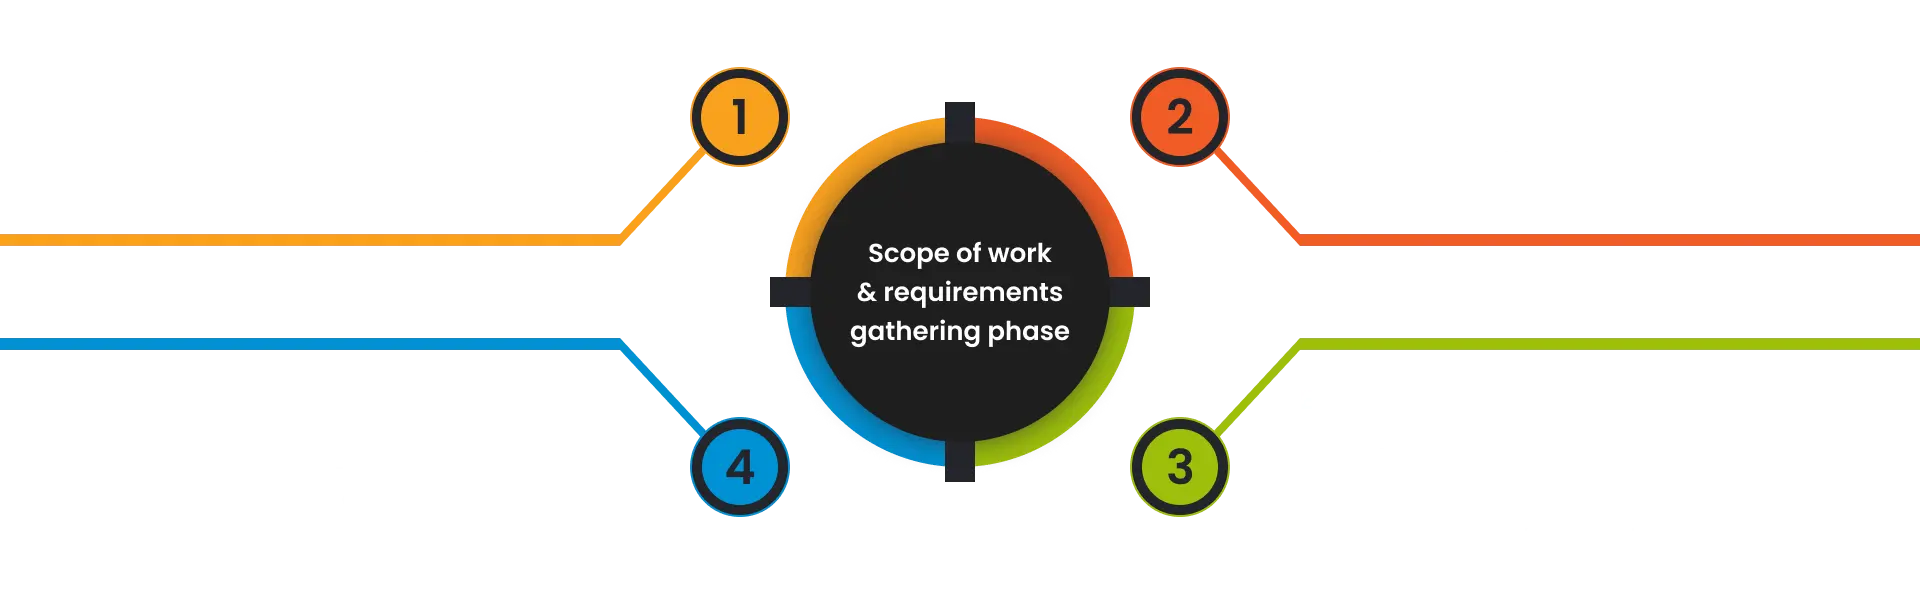 Scope of work and requirements gathering phase